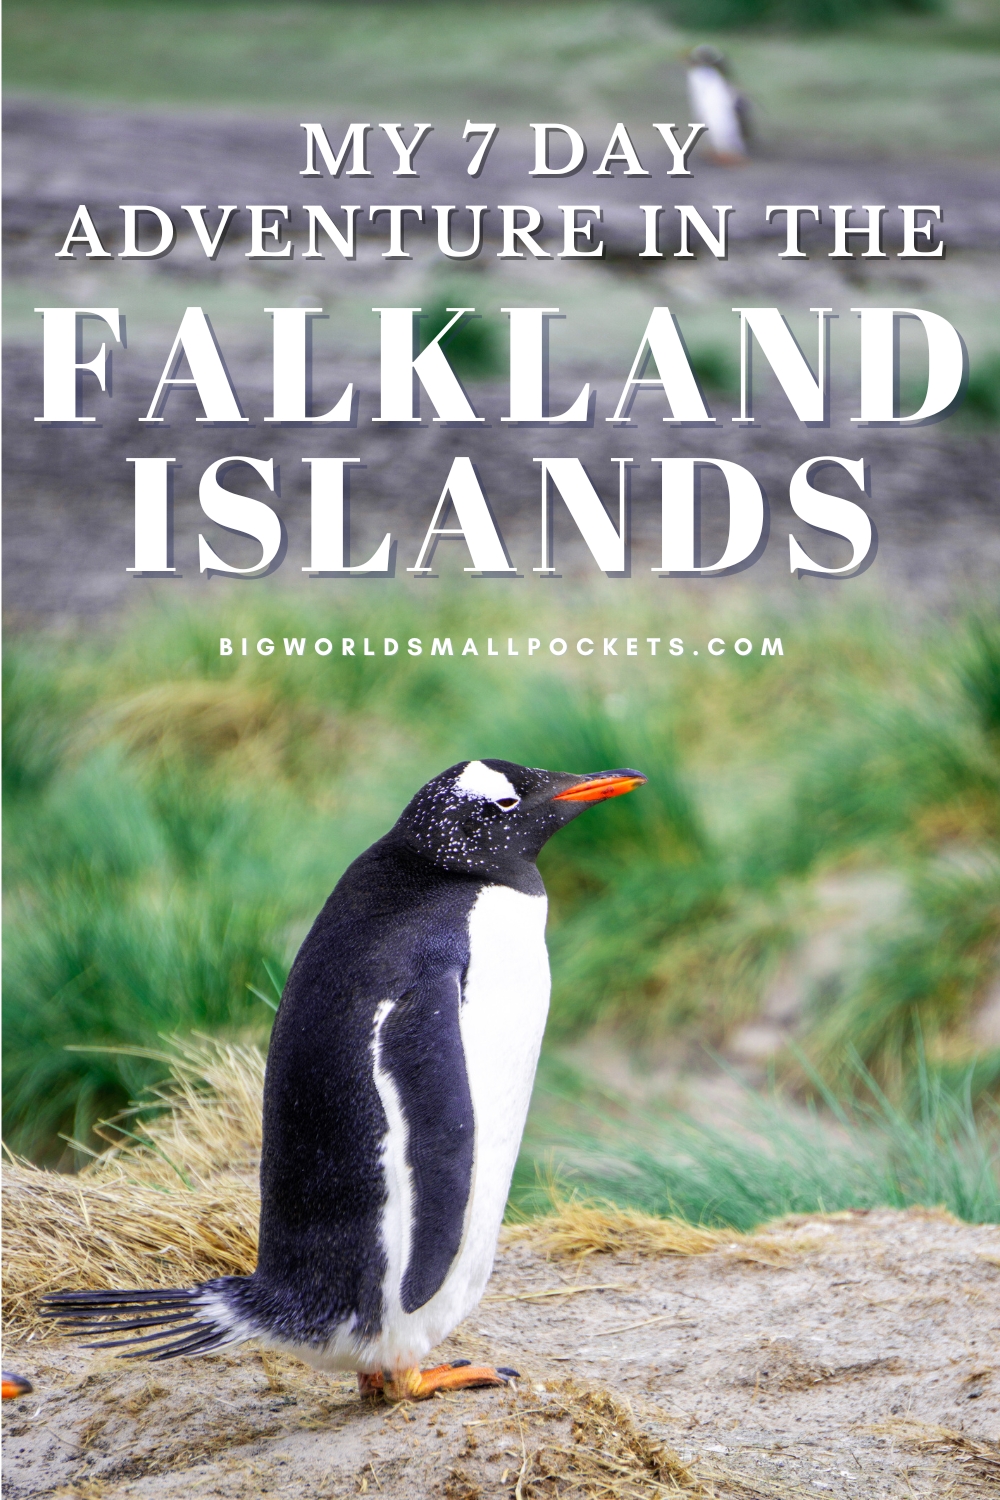 My 7 Day Visit to the Falkland Islands